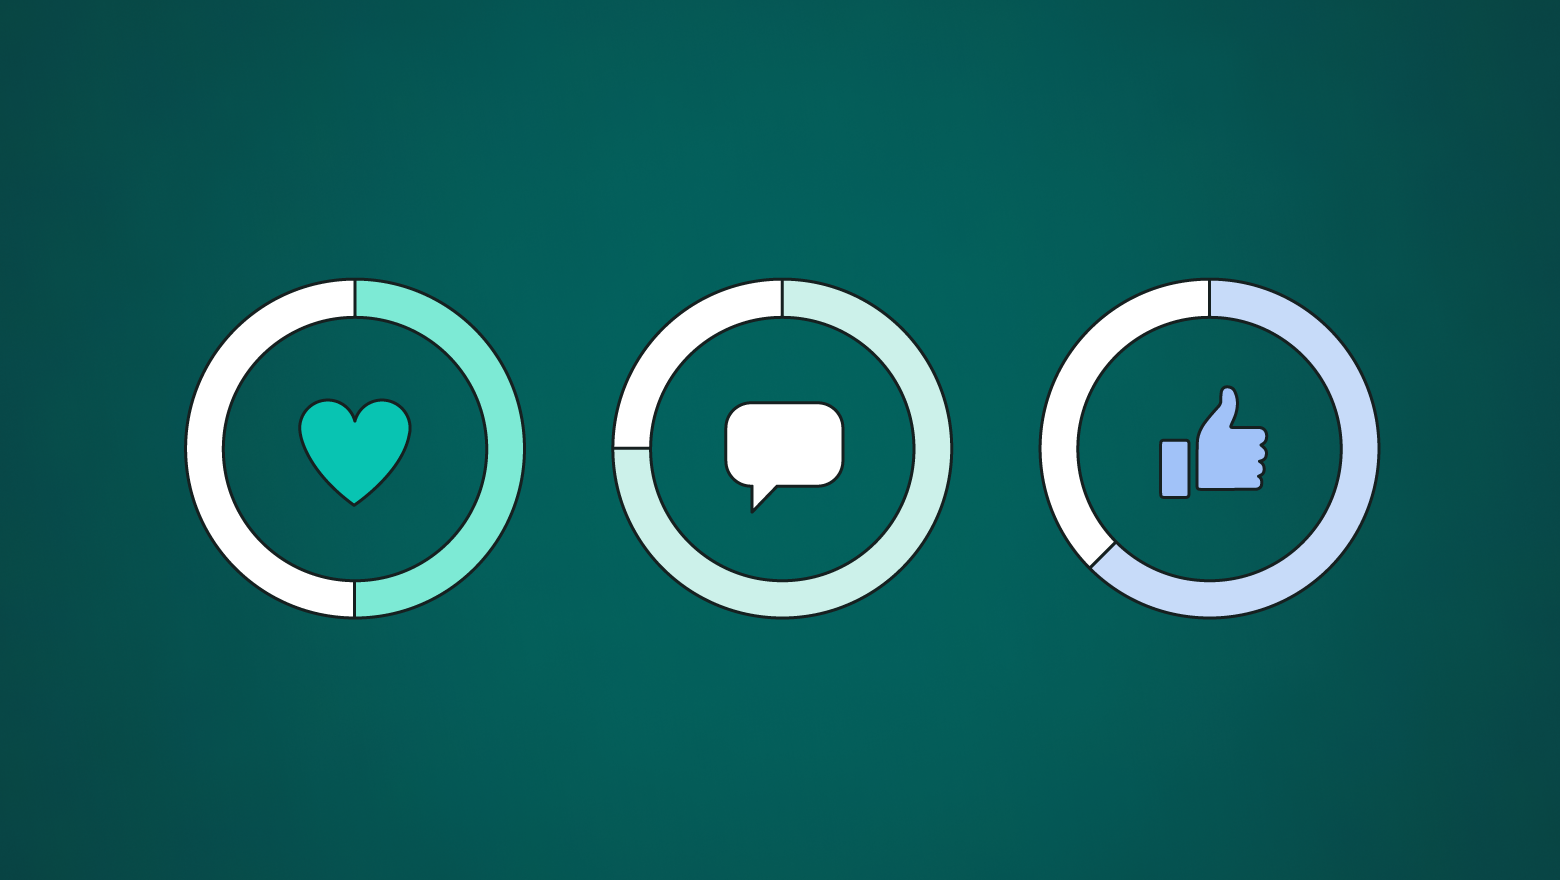 A green graphic with three circles displayed, each with a different graphic in the middle: A heart, a chat bubble and a thumb's up. These are all meant to represent social media metrics like engagement.